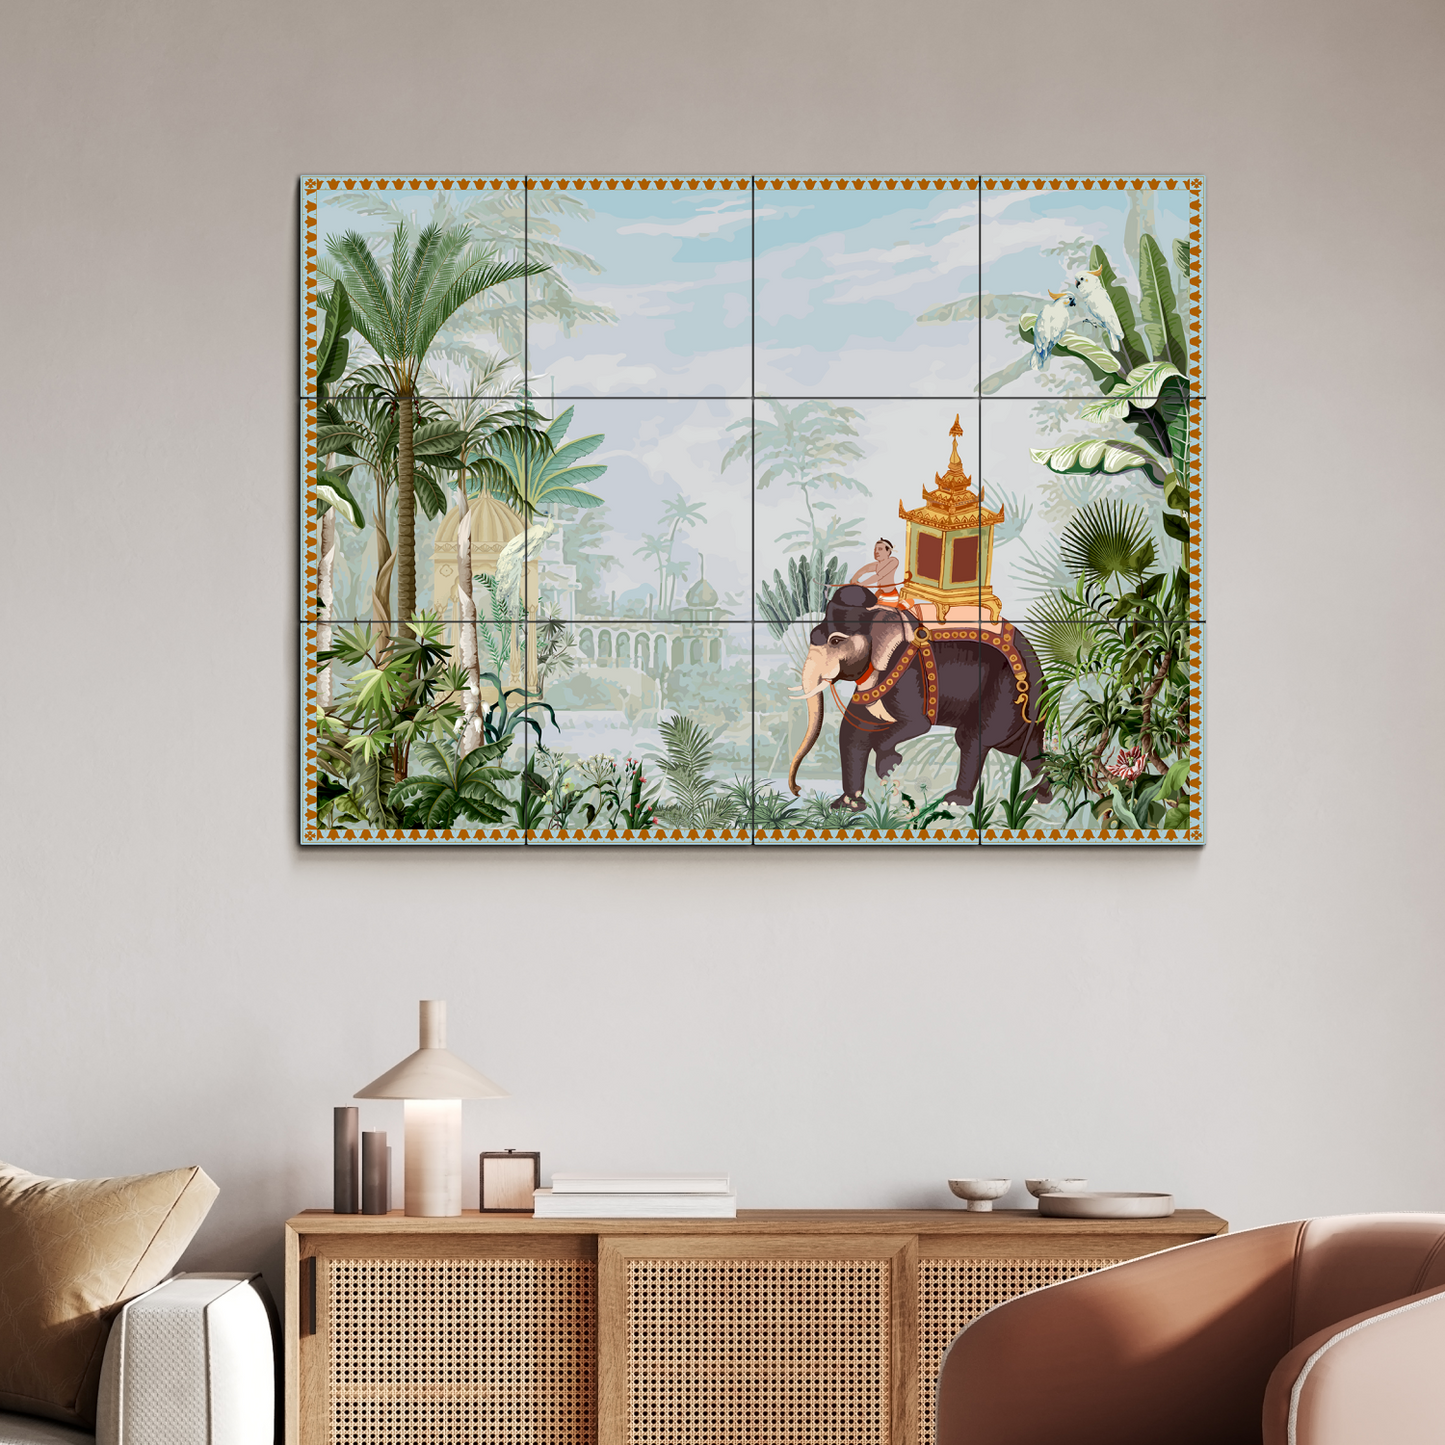 Royal Elephant in Kingdom Wooden Wall Tiles